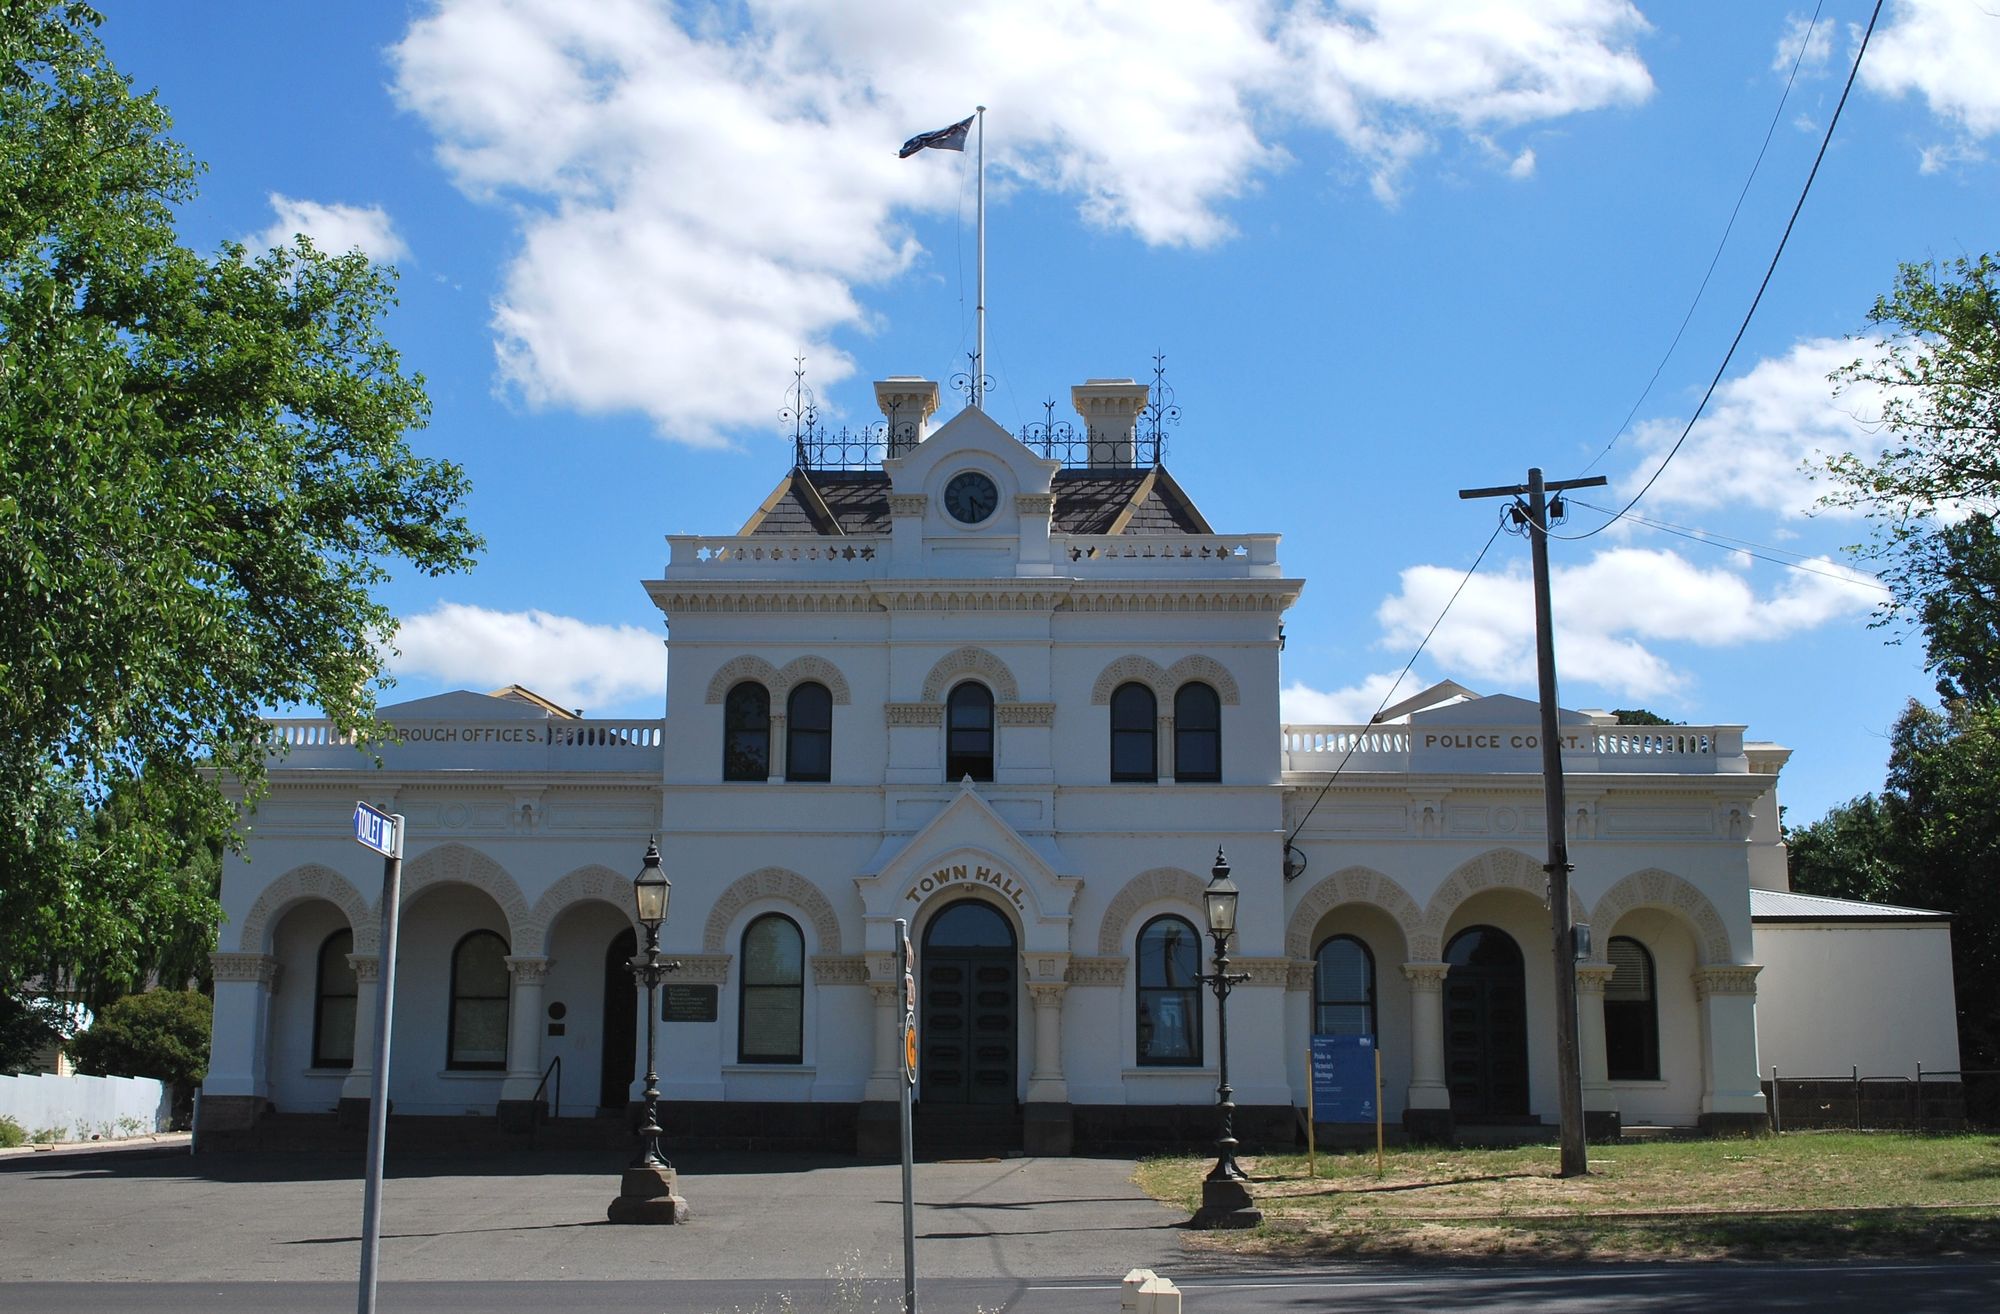 A large white historic building, the Clunes Town Hall, with the Court House to the right.